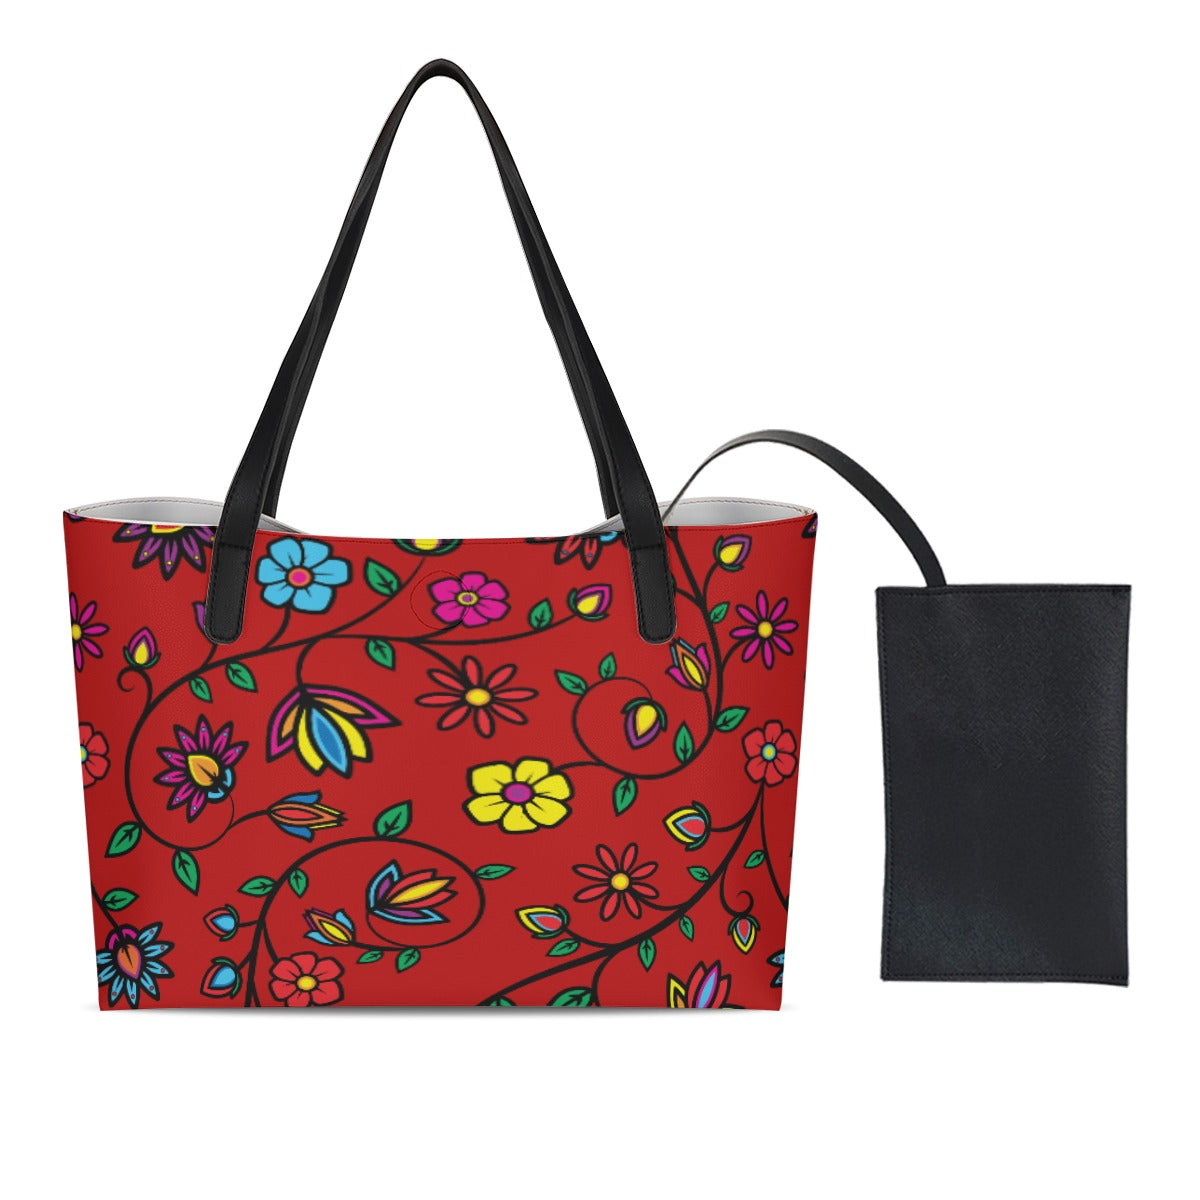 Nature's Nexus Red Shopping Tote Bag With Black Mini Purse